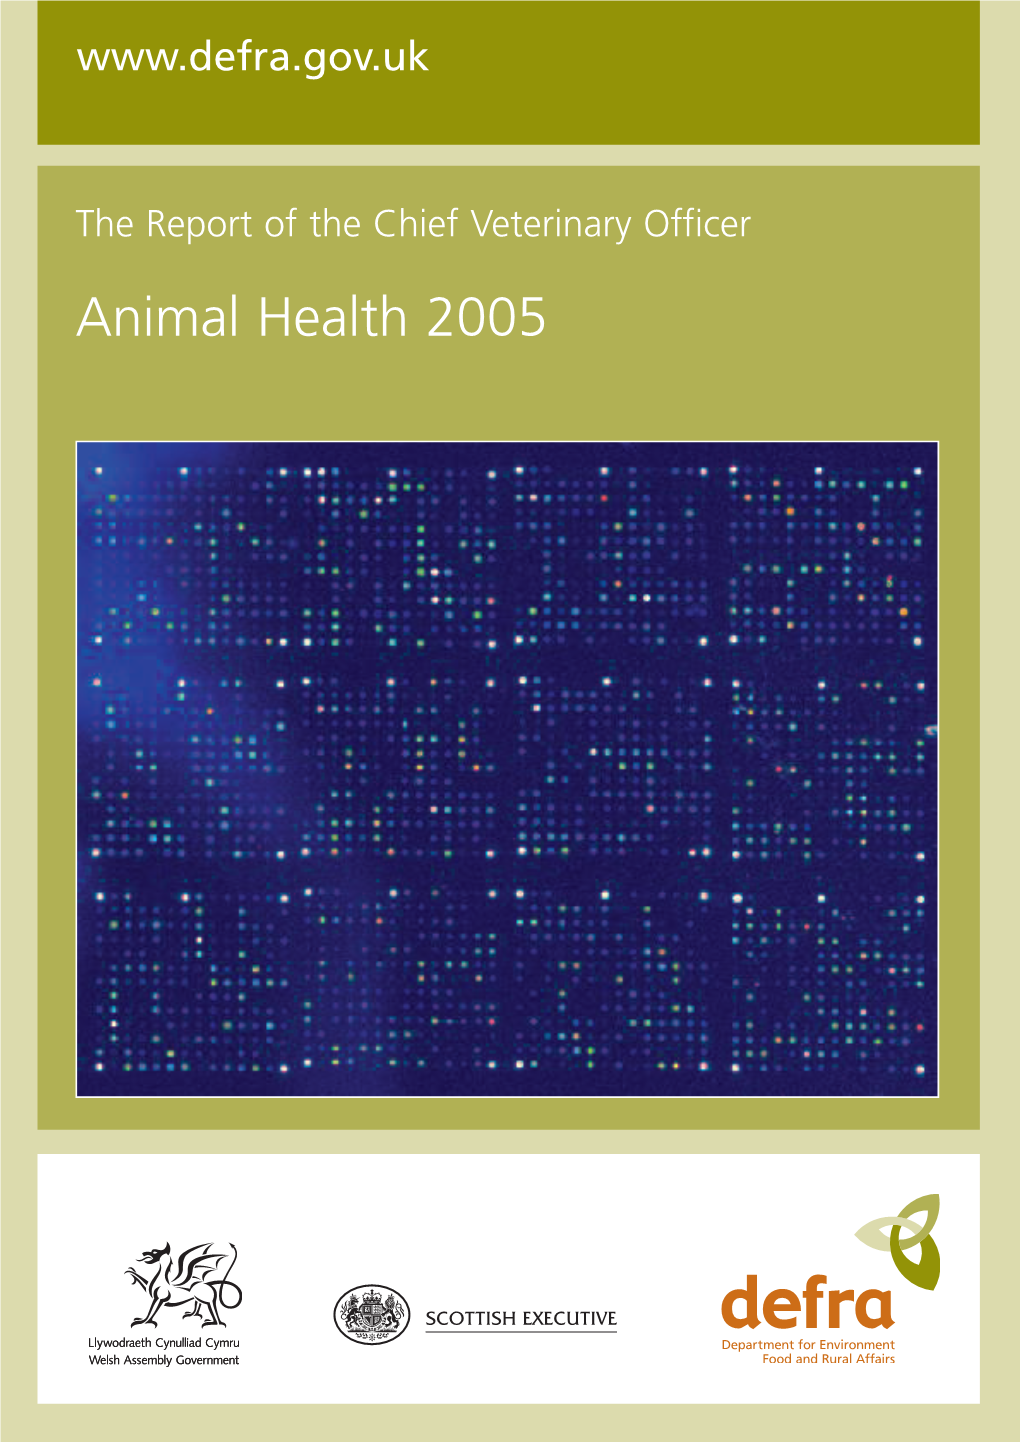 The Report of the Chief Veterinary Officer 2005